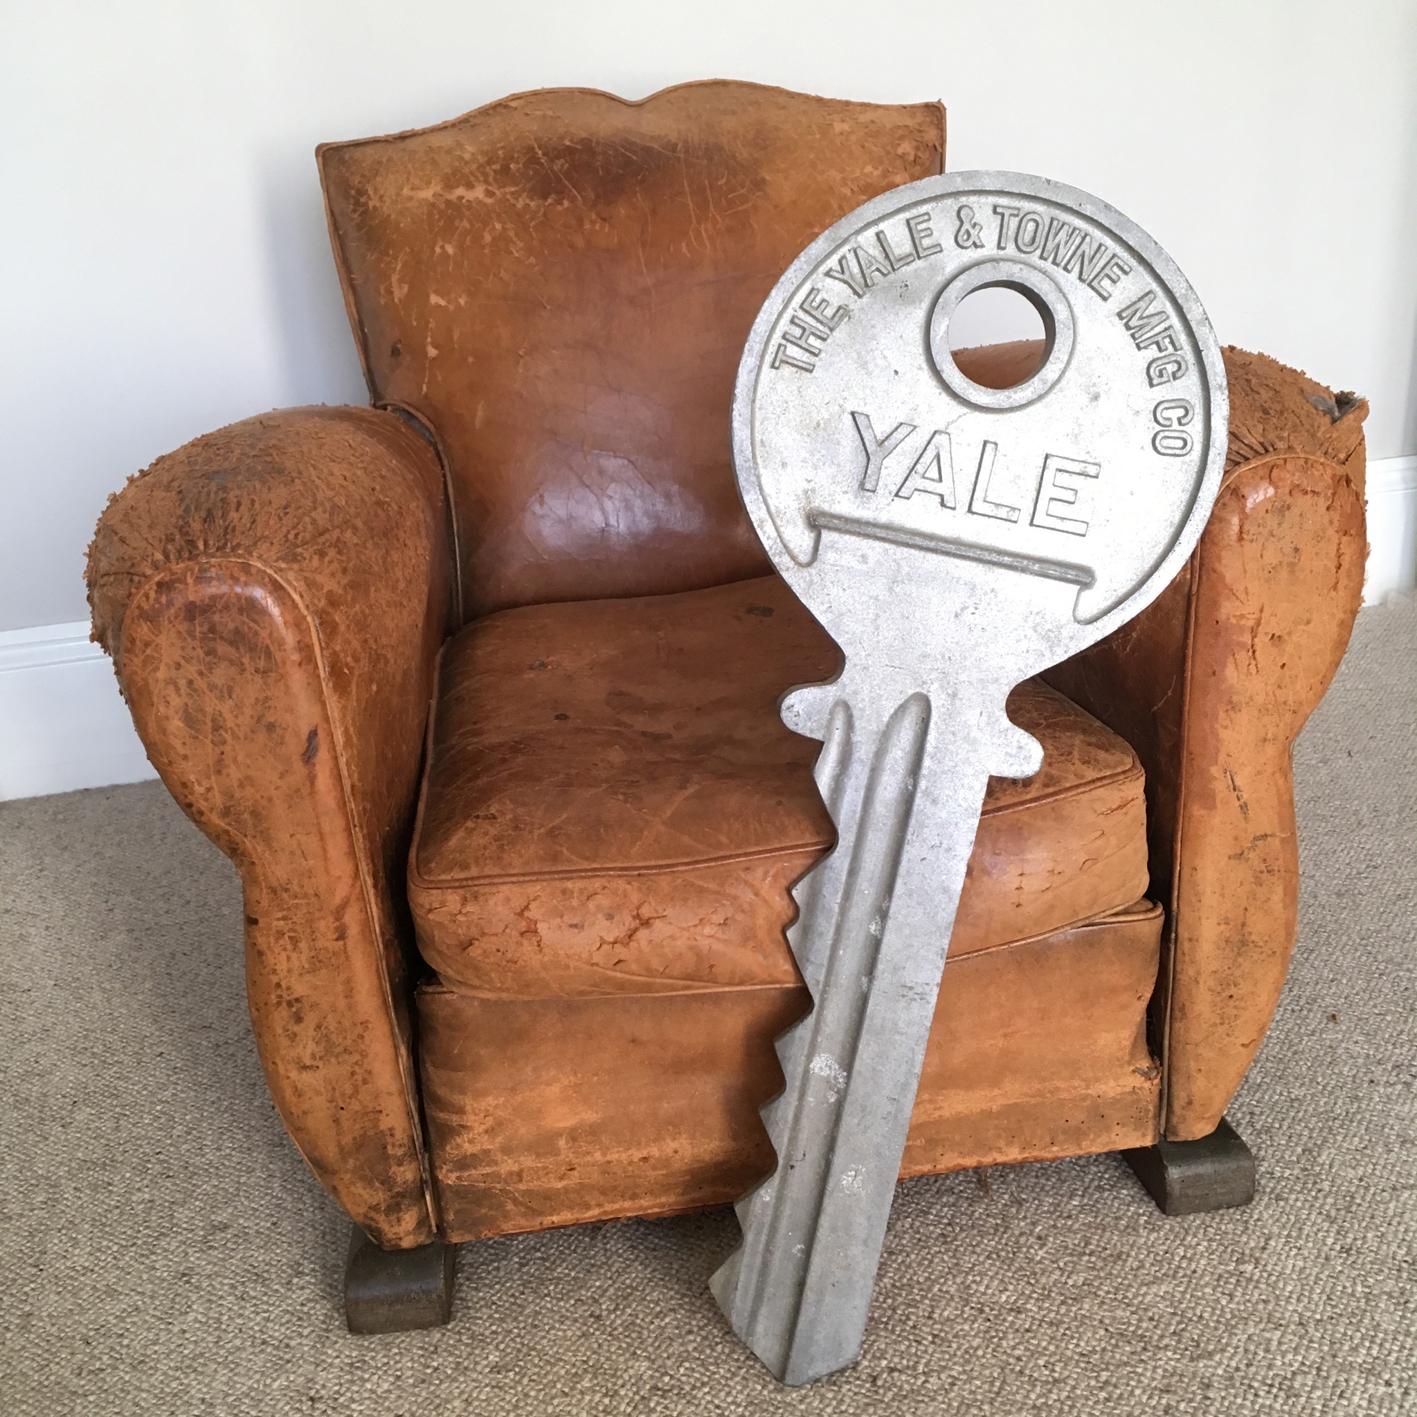 A large cast metal advertising key sign for the Yale & Towne Mfg Co (Yale).

This sign would have been either hung outside or inside the key cutting shop to advertise.

circa 1940s-1950s.

England.
Cast aluminium

Measures: Height 77.5cm